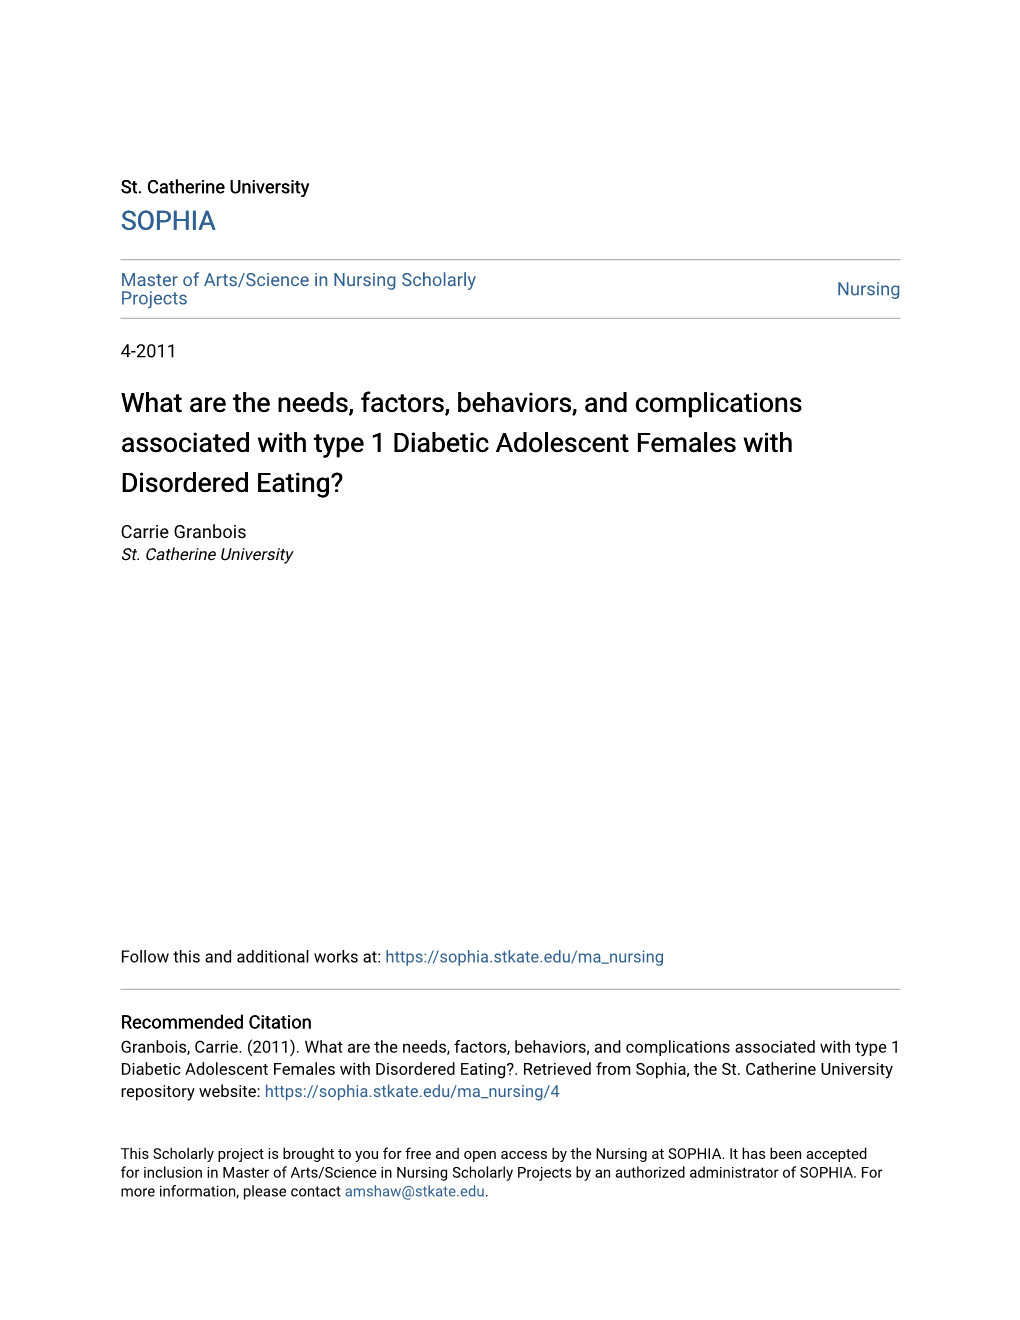 What Are the Needs, Factors, Behaviors, and Complications Associated with Type 1 Diabetic Adolescent Females with Disordered Eating?